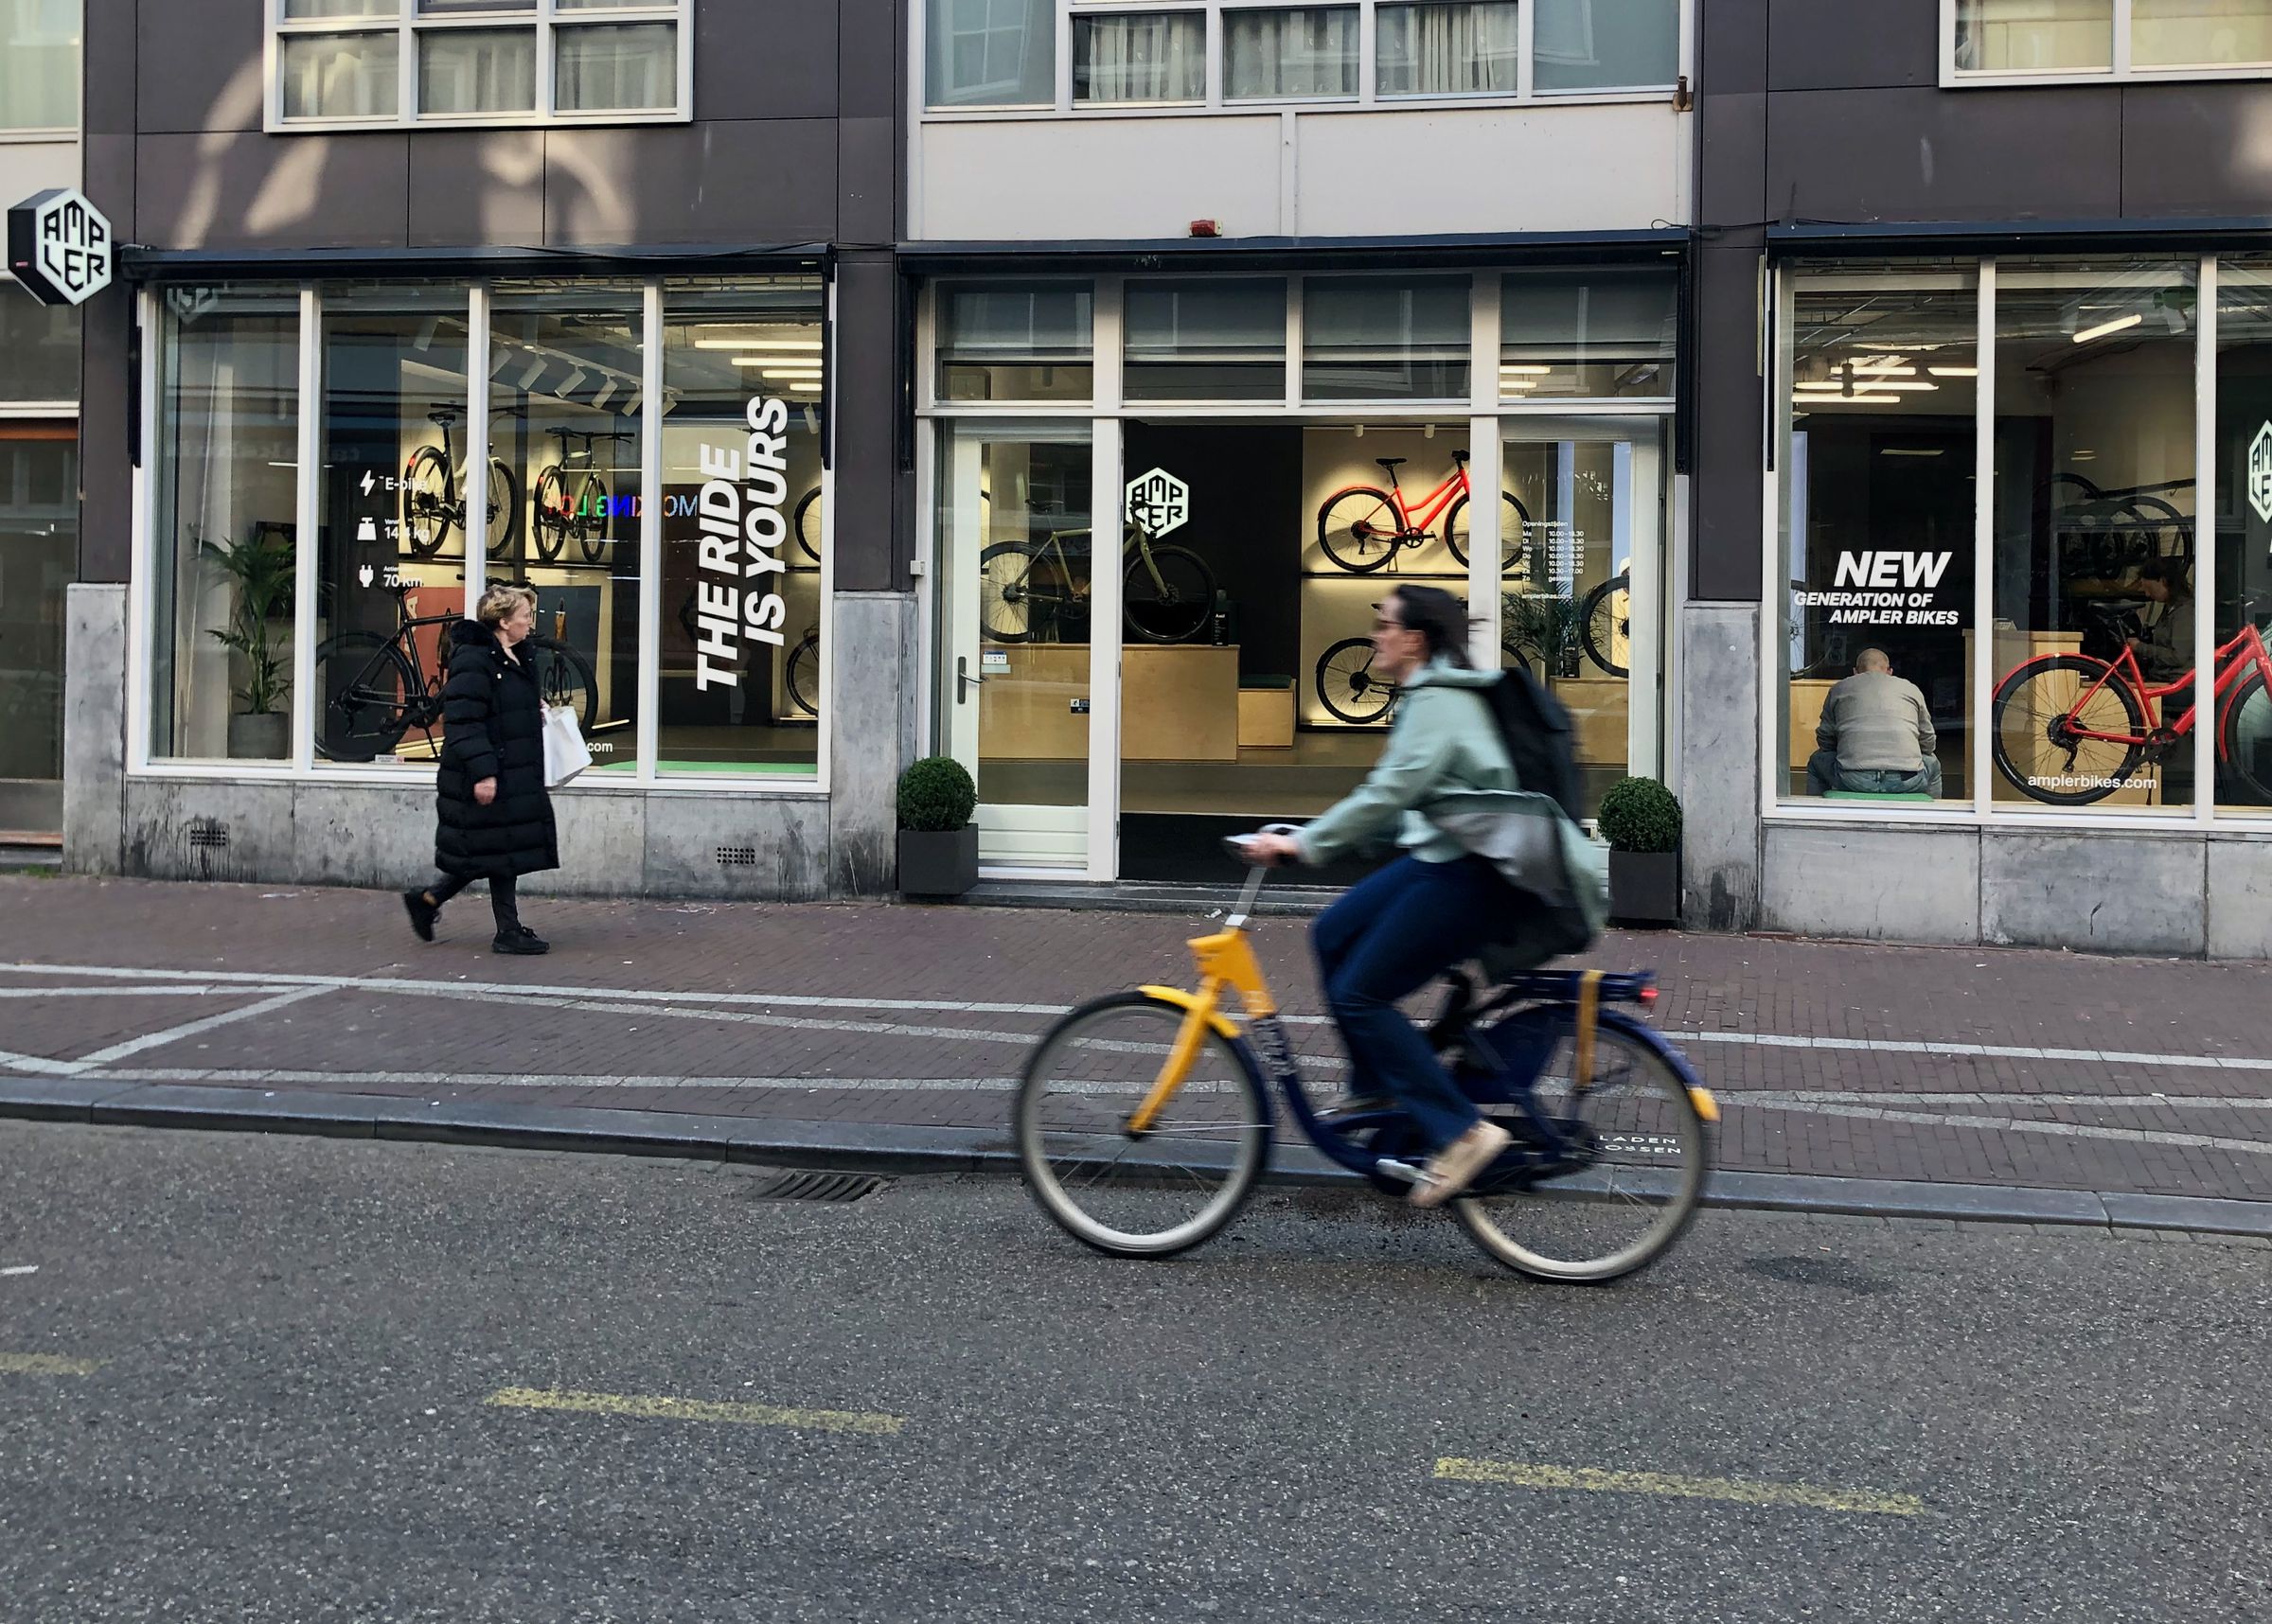 Amsterdam’s Ampler showroom and service center opened last year just steps from Central Station (click here to enlarge).